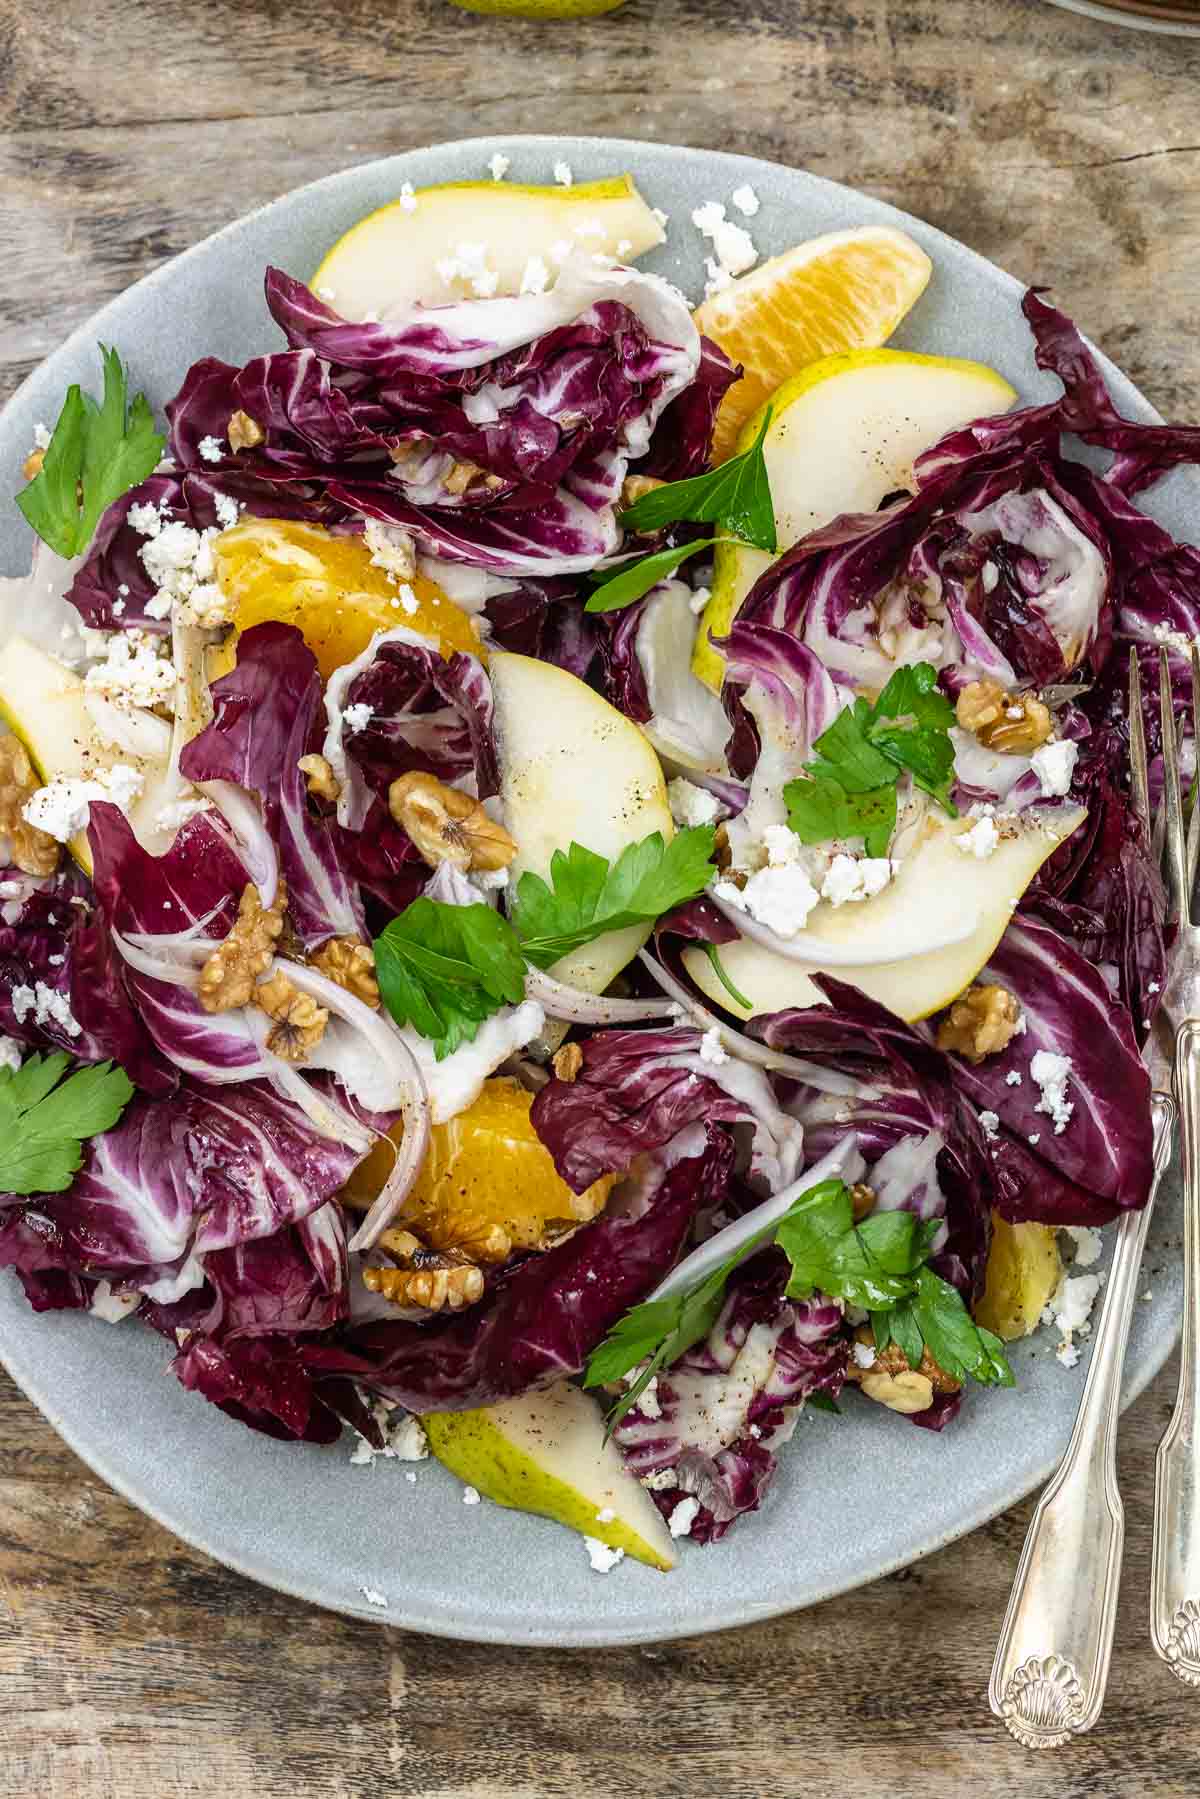 a plate of radicchio salad with pears, oranges shallots, walnuts and feta cheese.